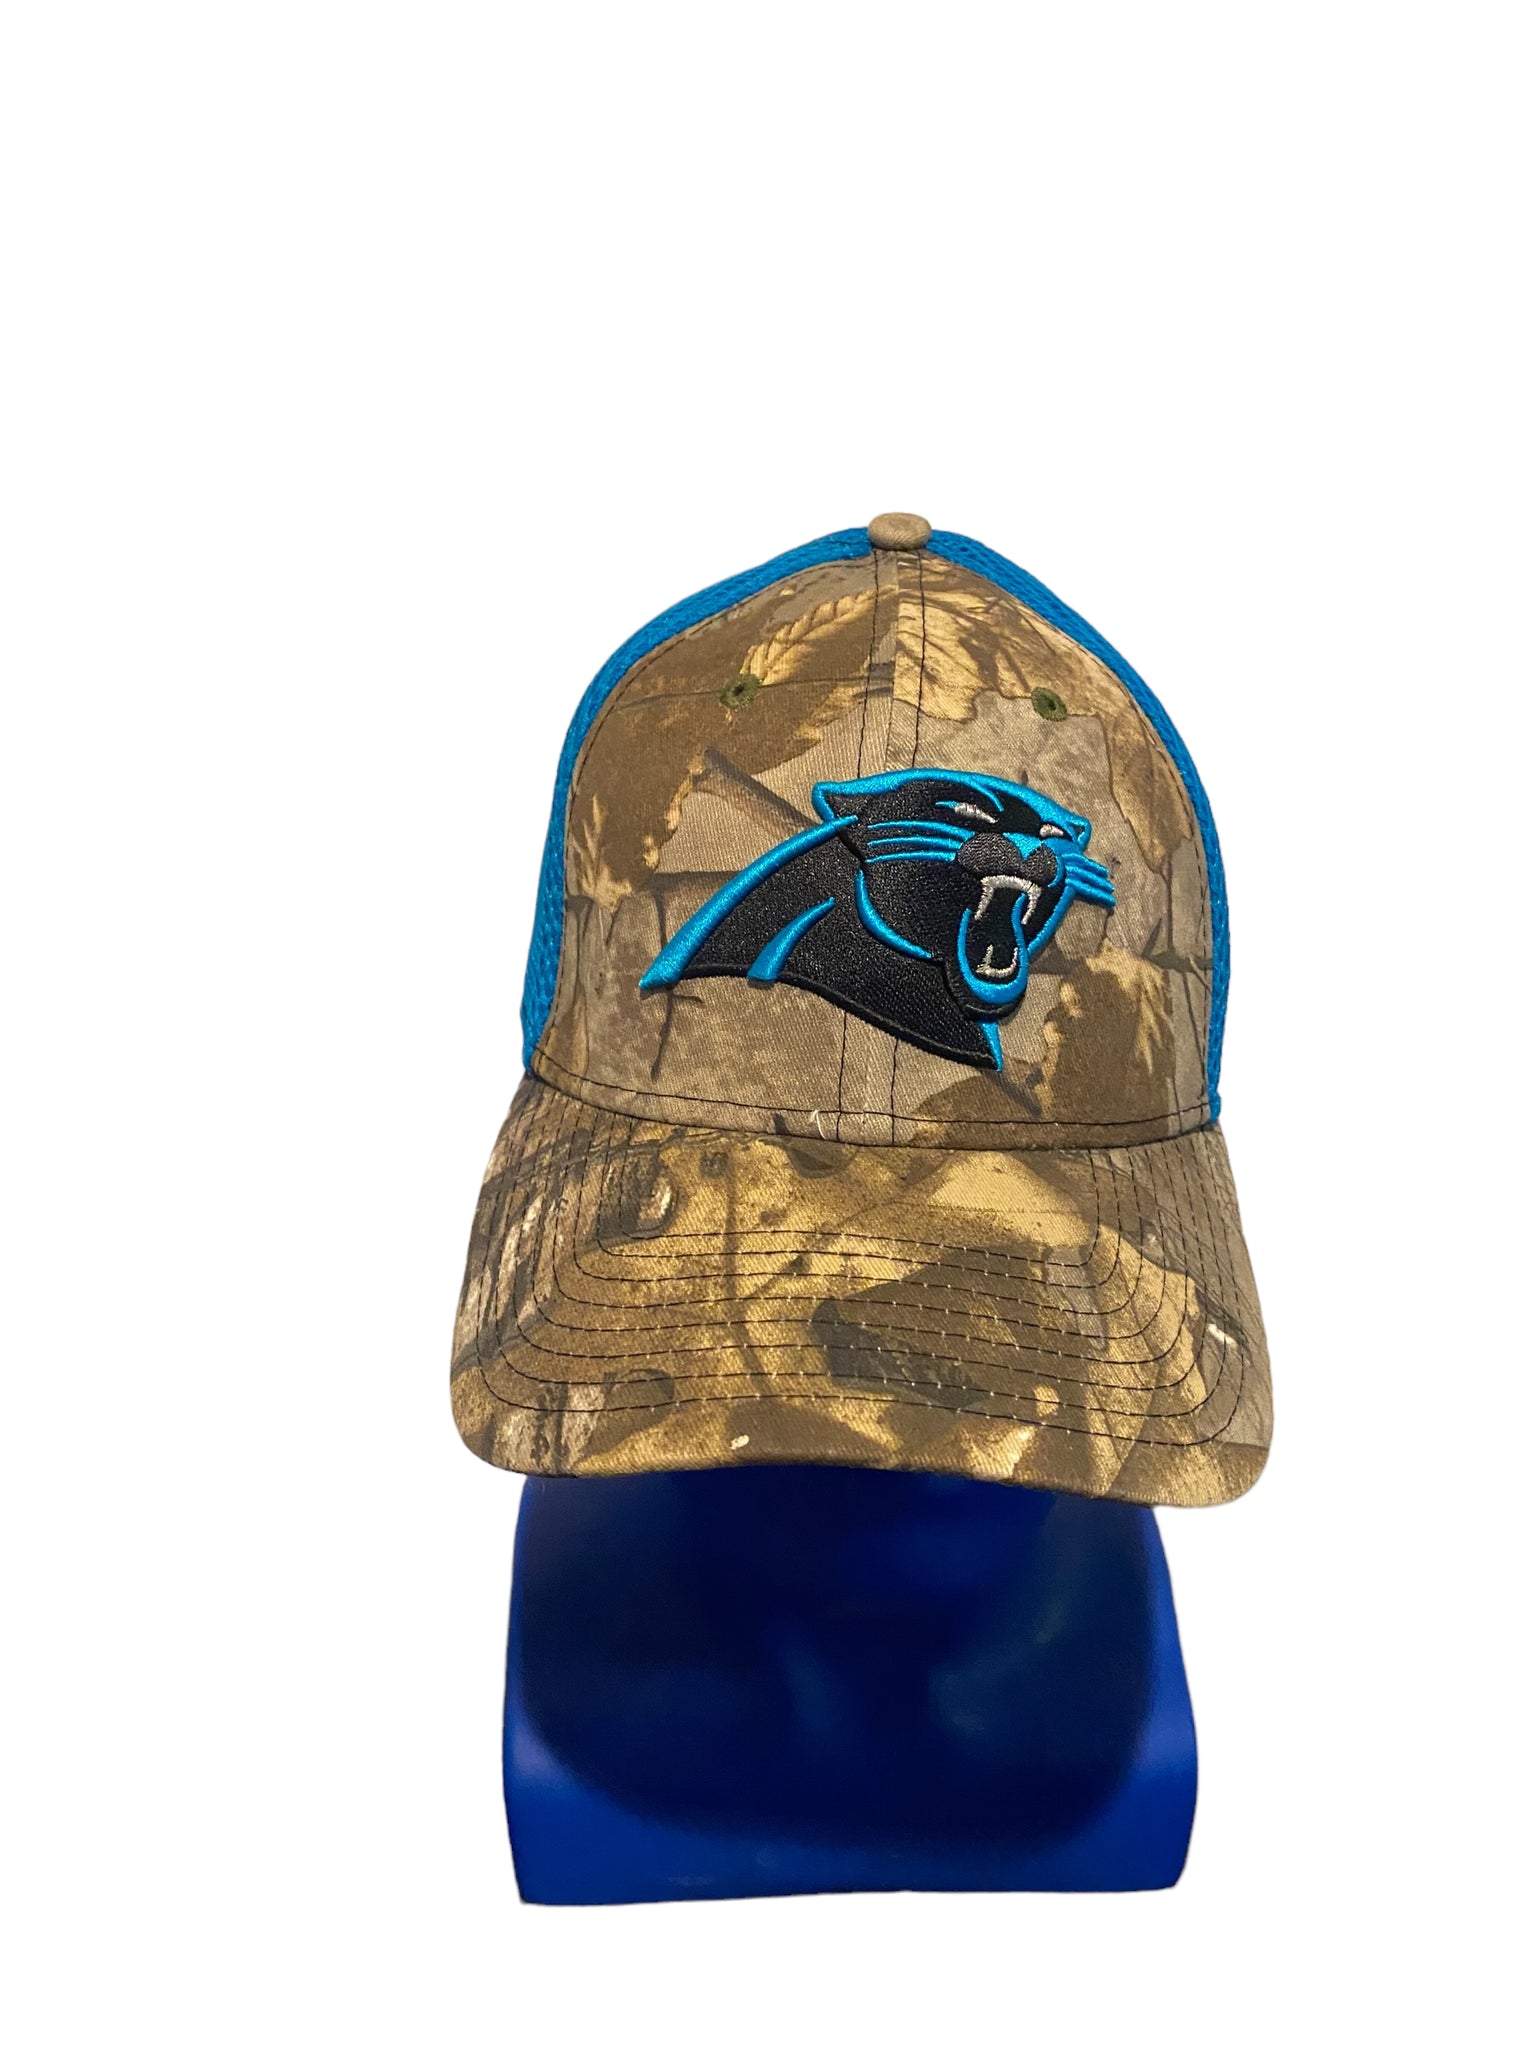 new era carolina panthers embroidered patch logo camo and blue fitted m/l hat